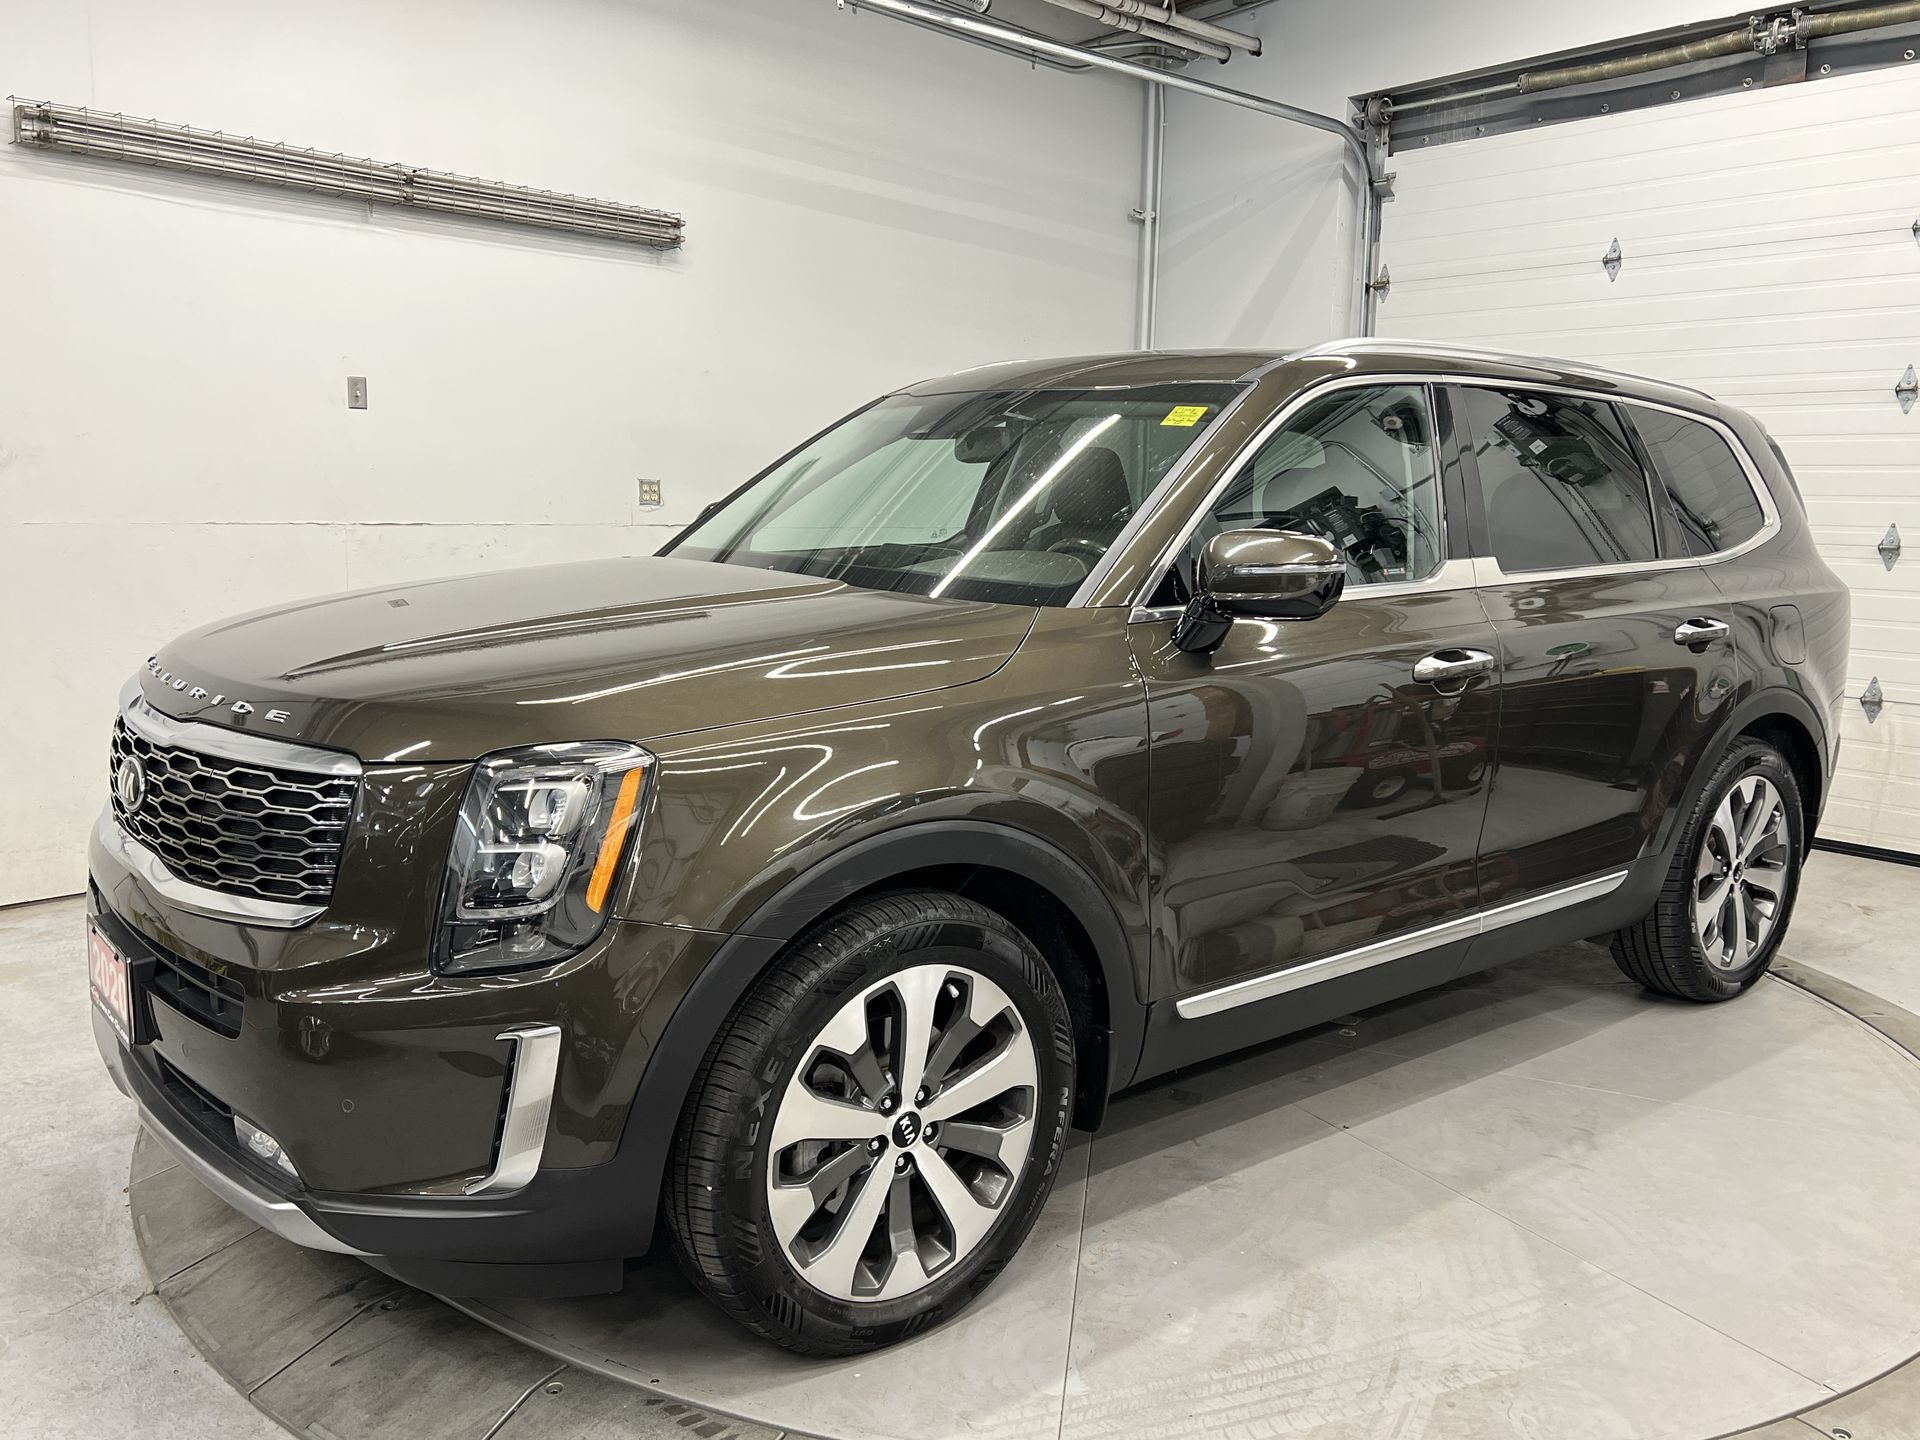 2020 Kia Telluride SX AWD| 8 PASS | 360 CAM | COOLED SEATS | PANOROOF